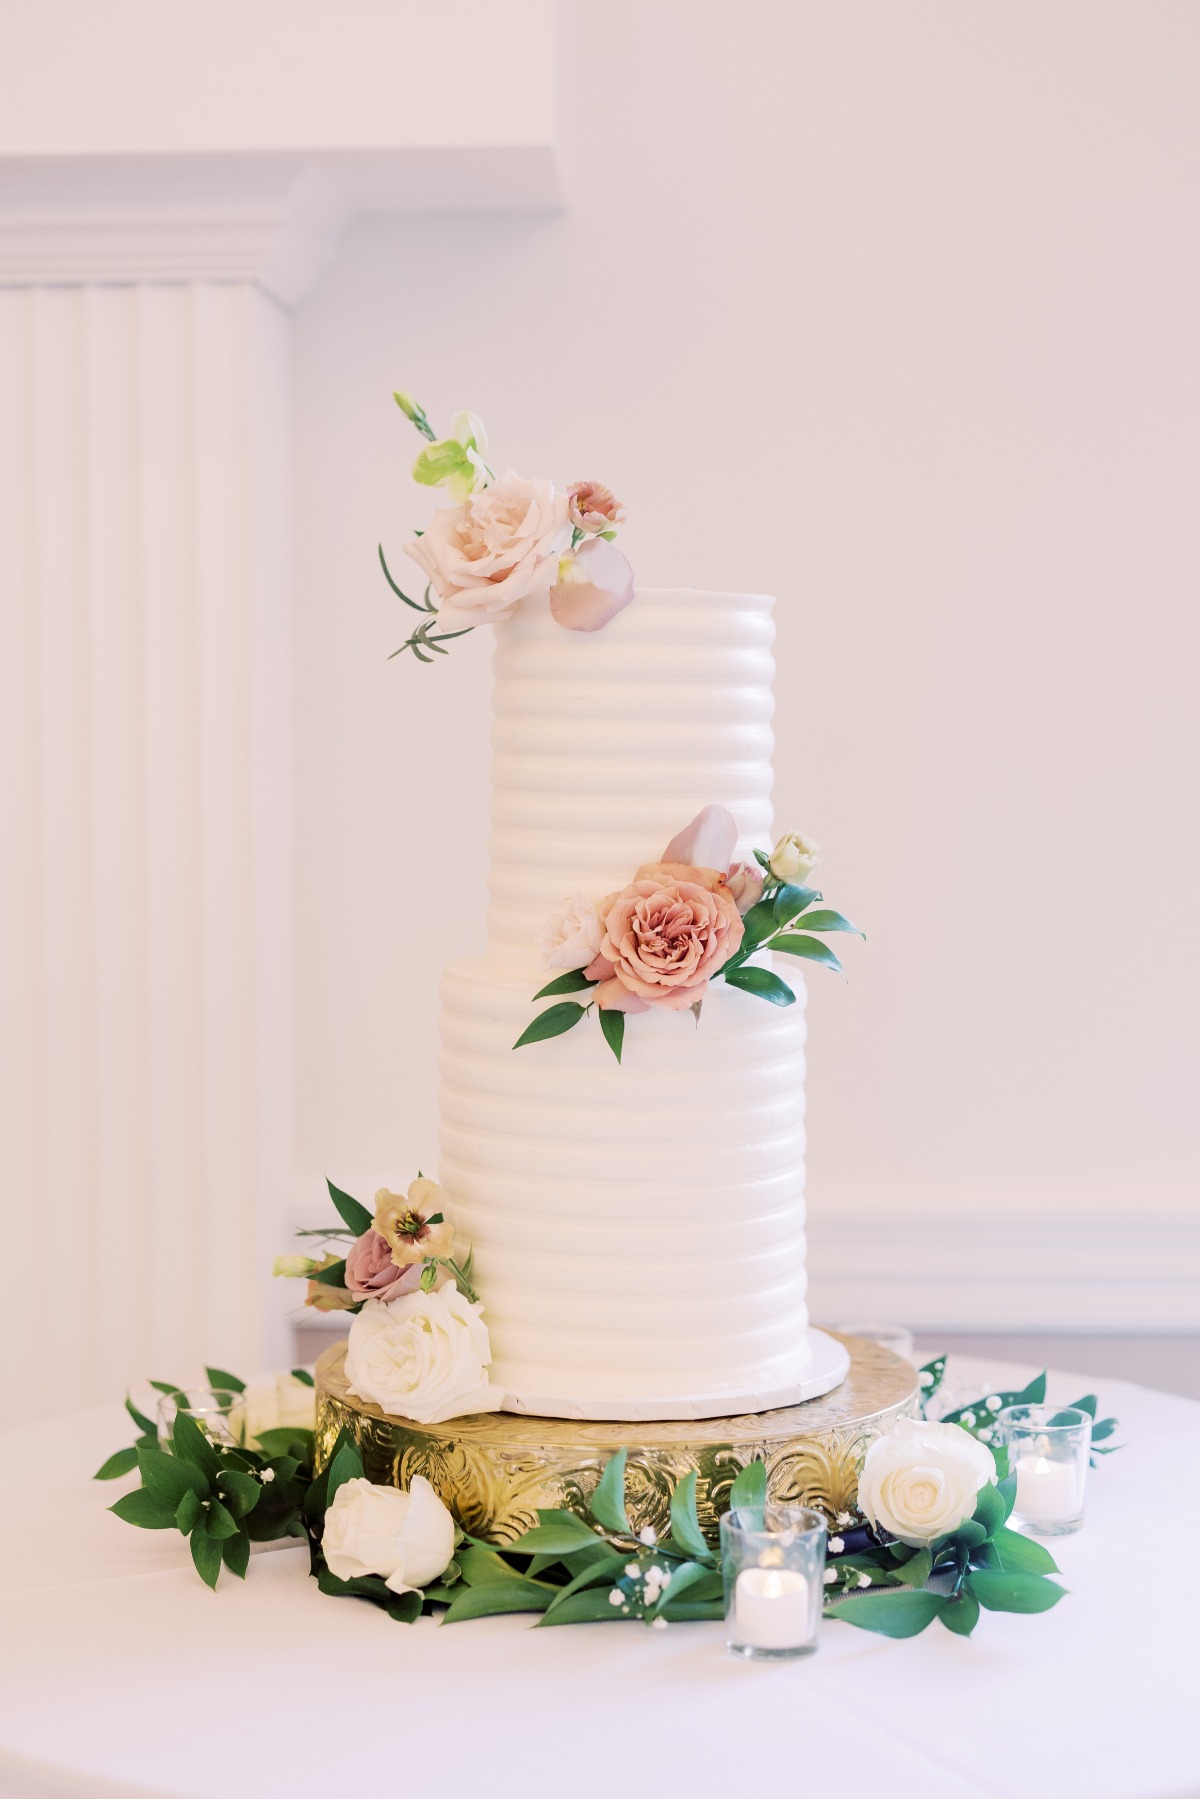 simple wedding cakes with fresh flower accents